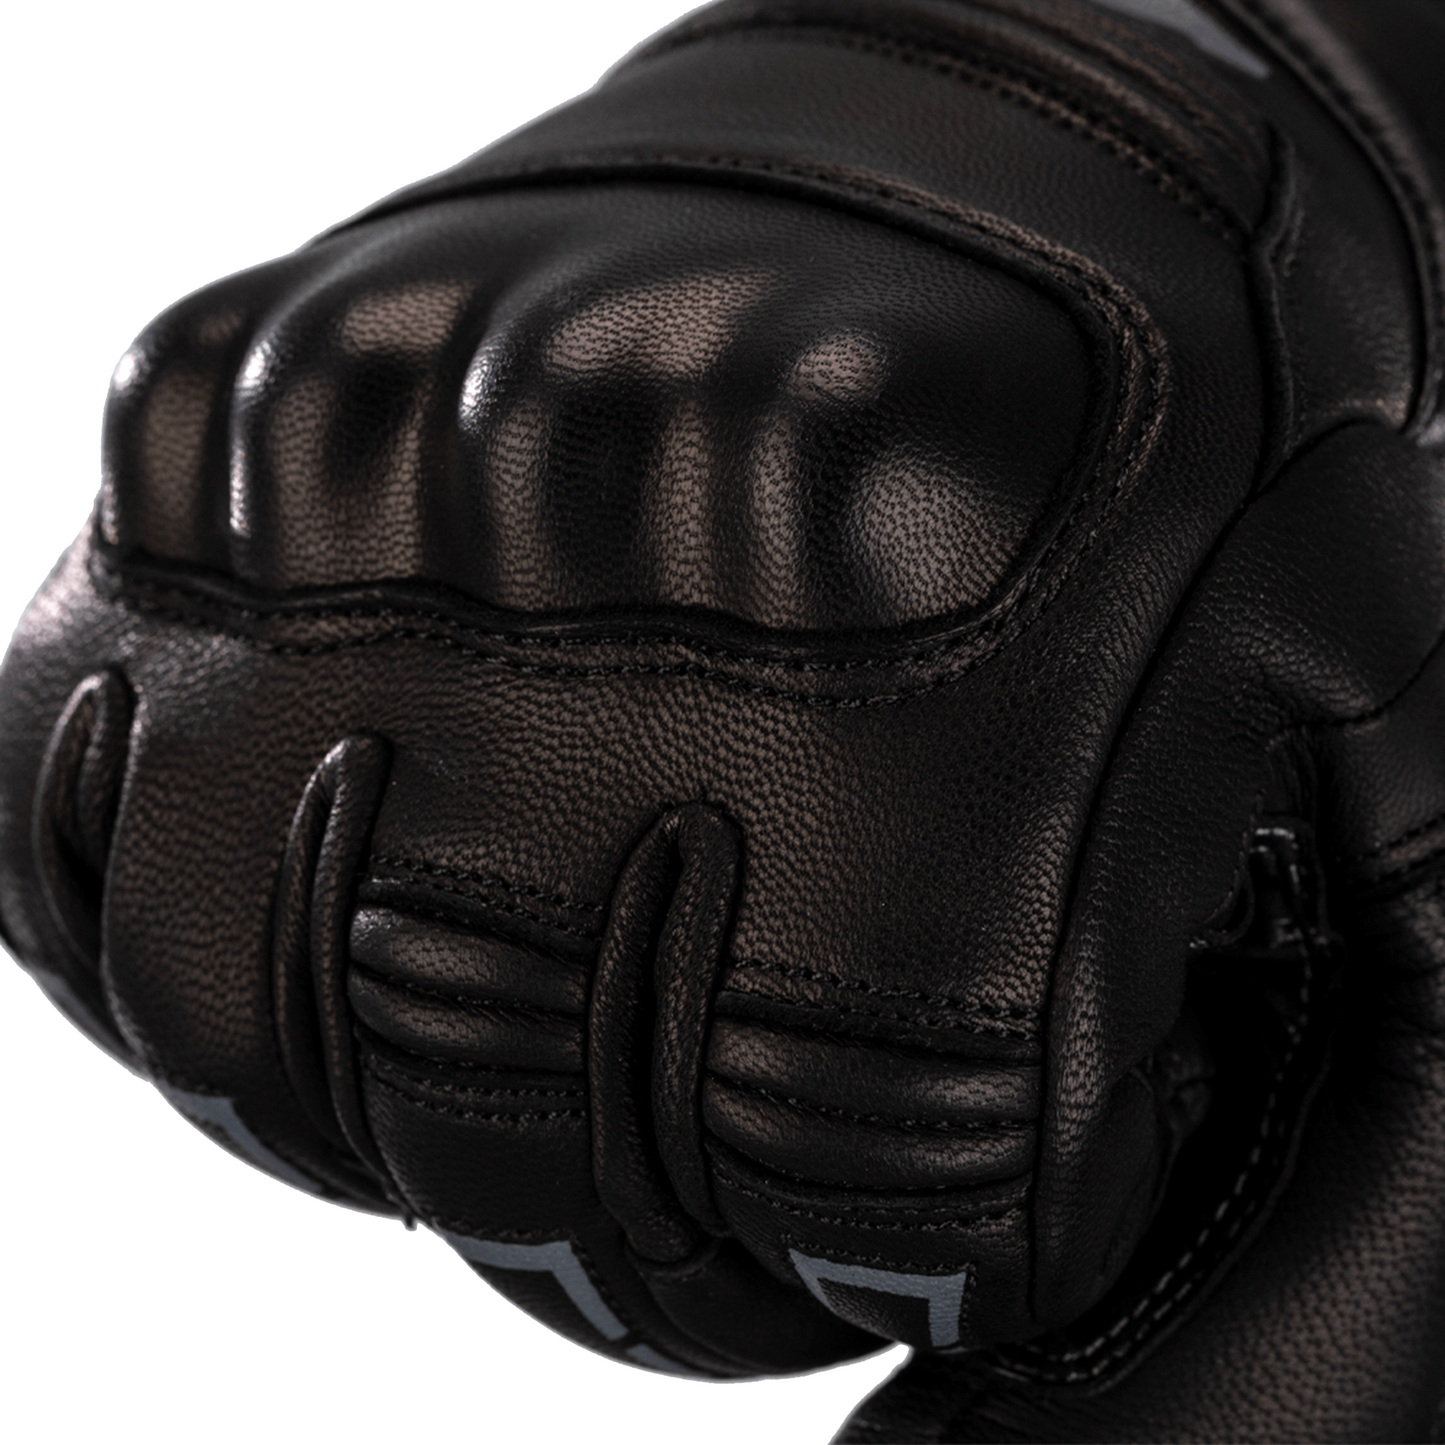 RST Storm 2 Leather (CE) Waterproof Gloves - Black (2680)